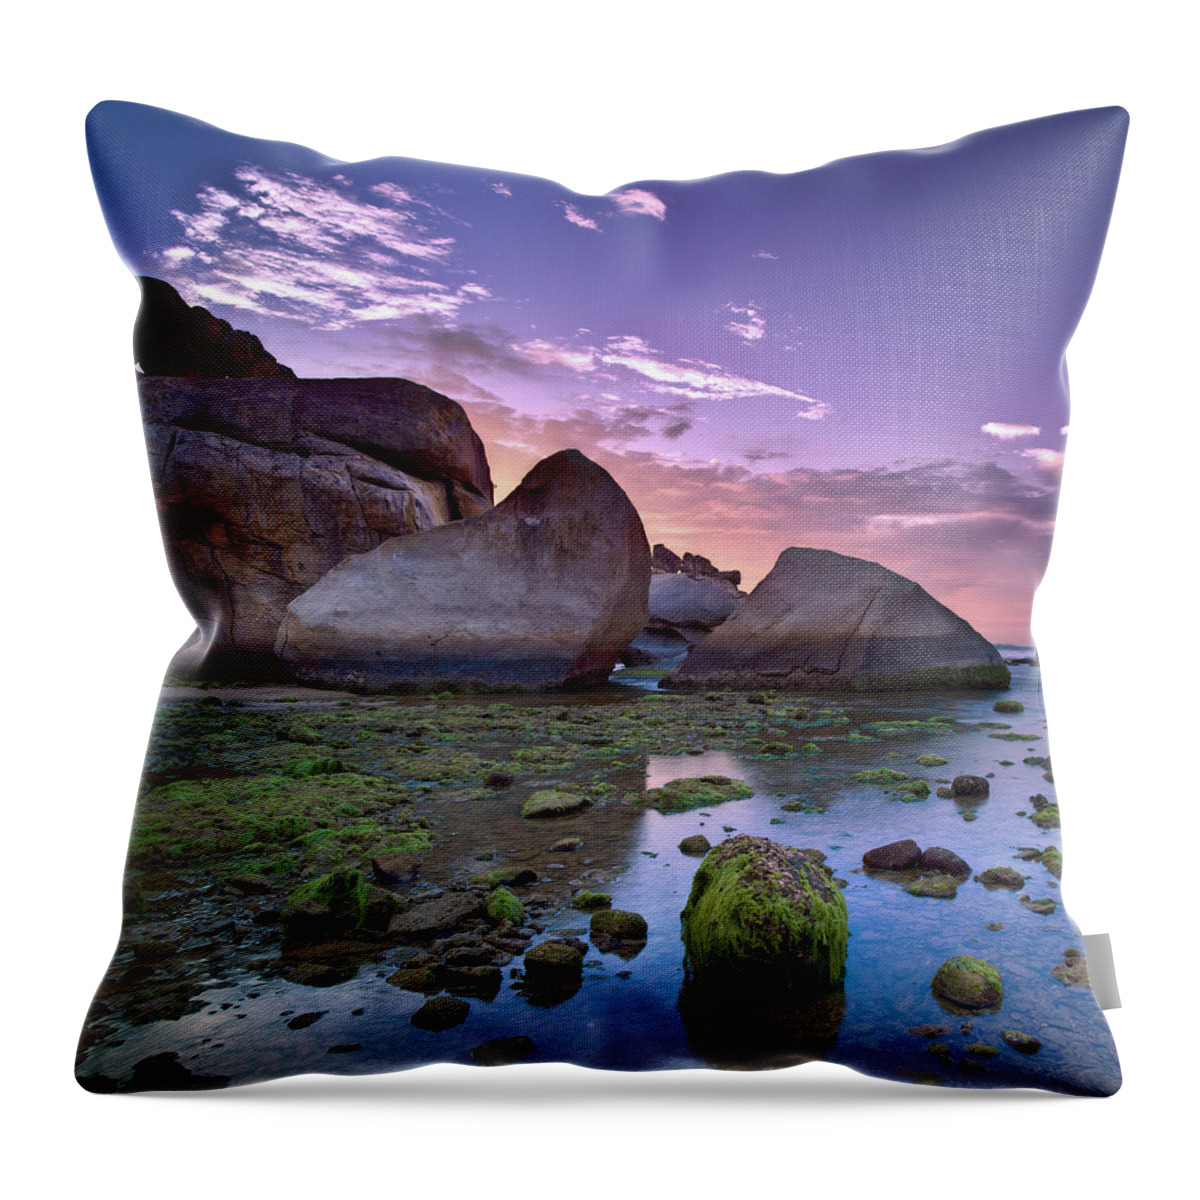 Scenics Throw Pillow featuring the photograph Sea Moss On Coral Rocks At Sunrise by Andreluu